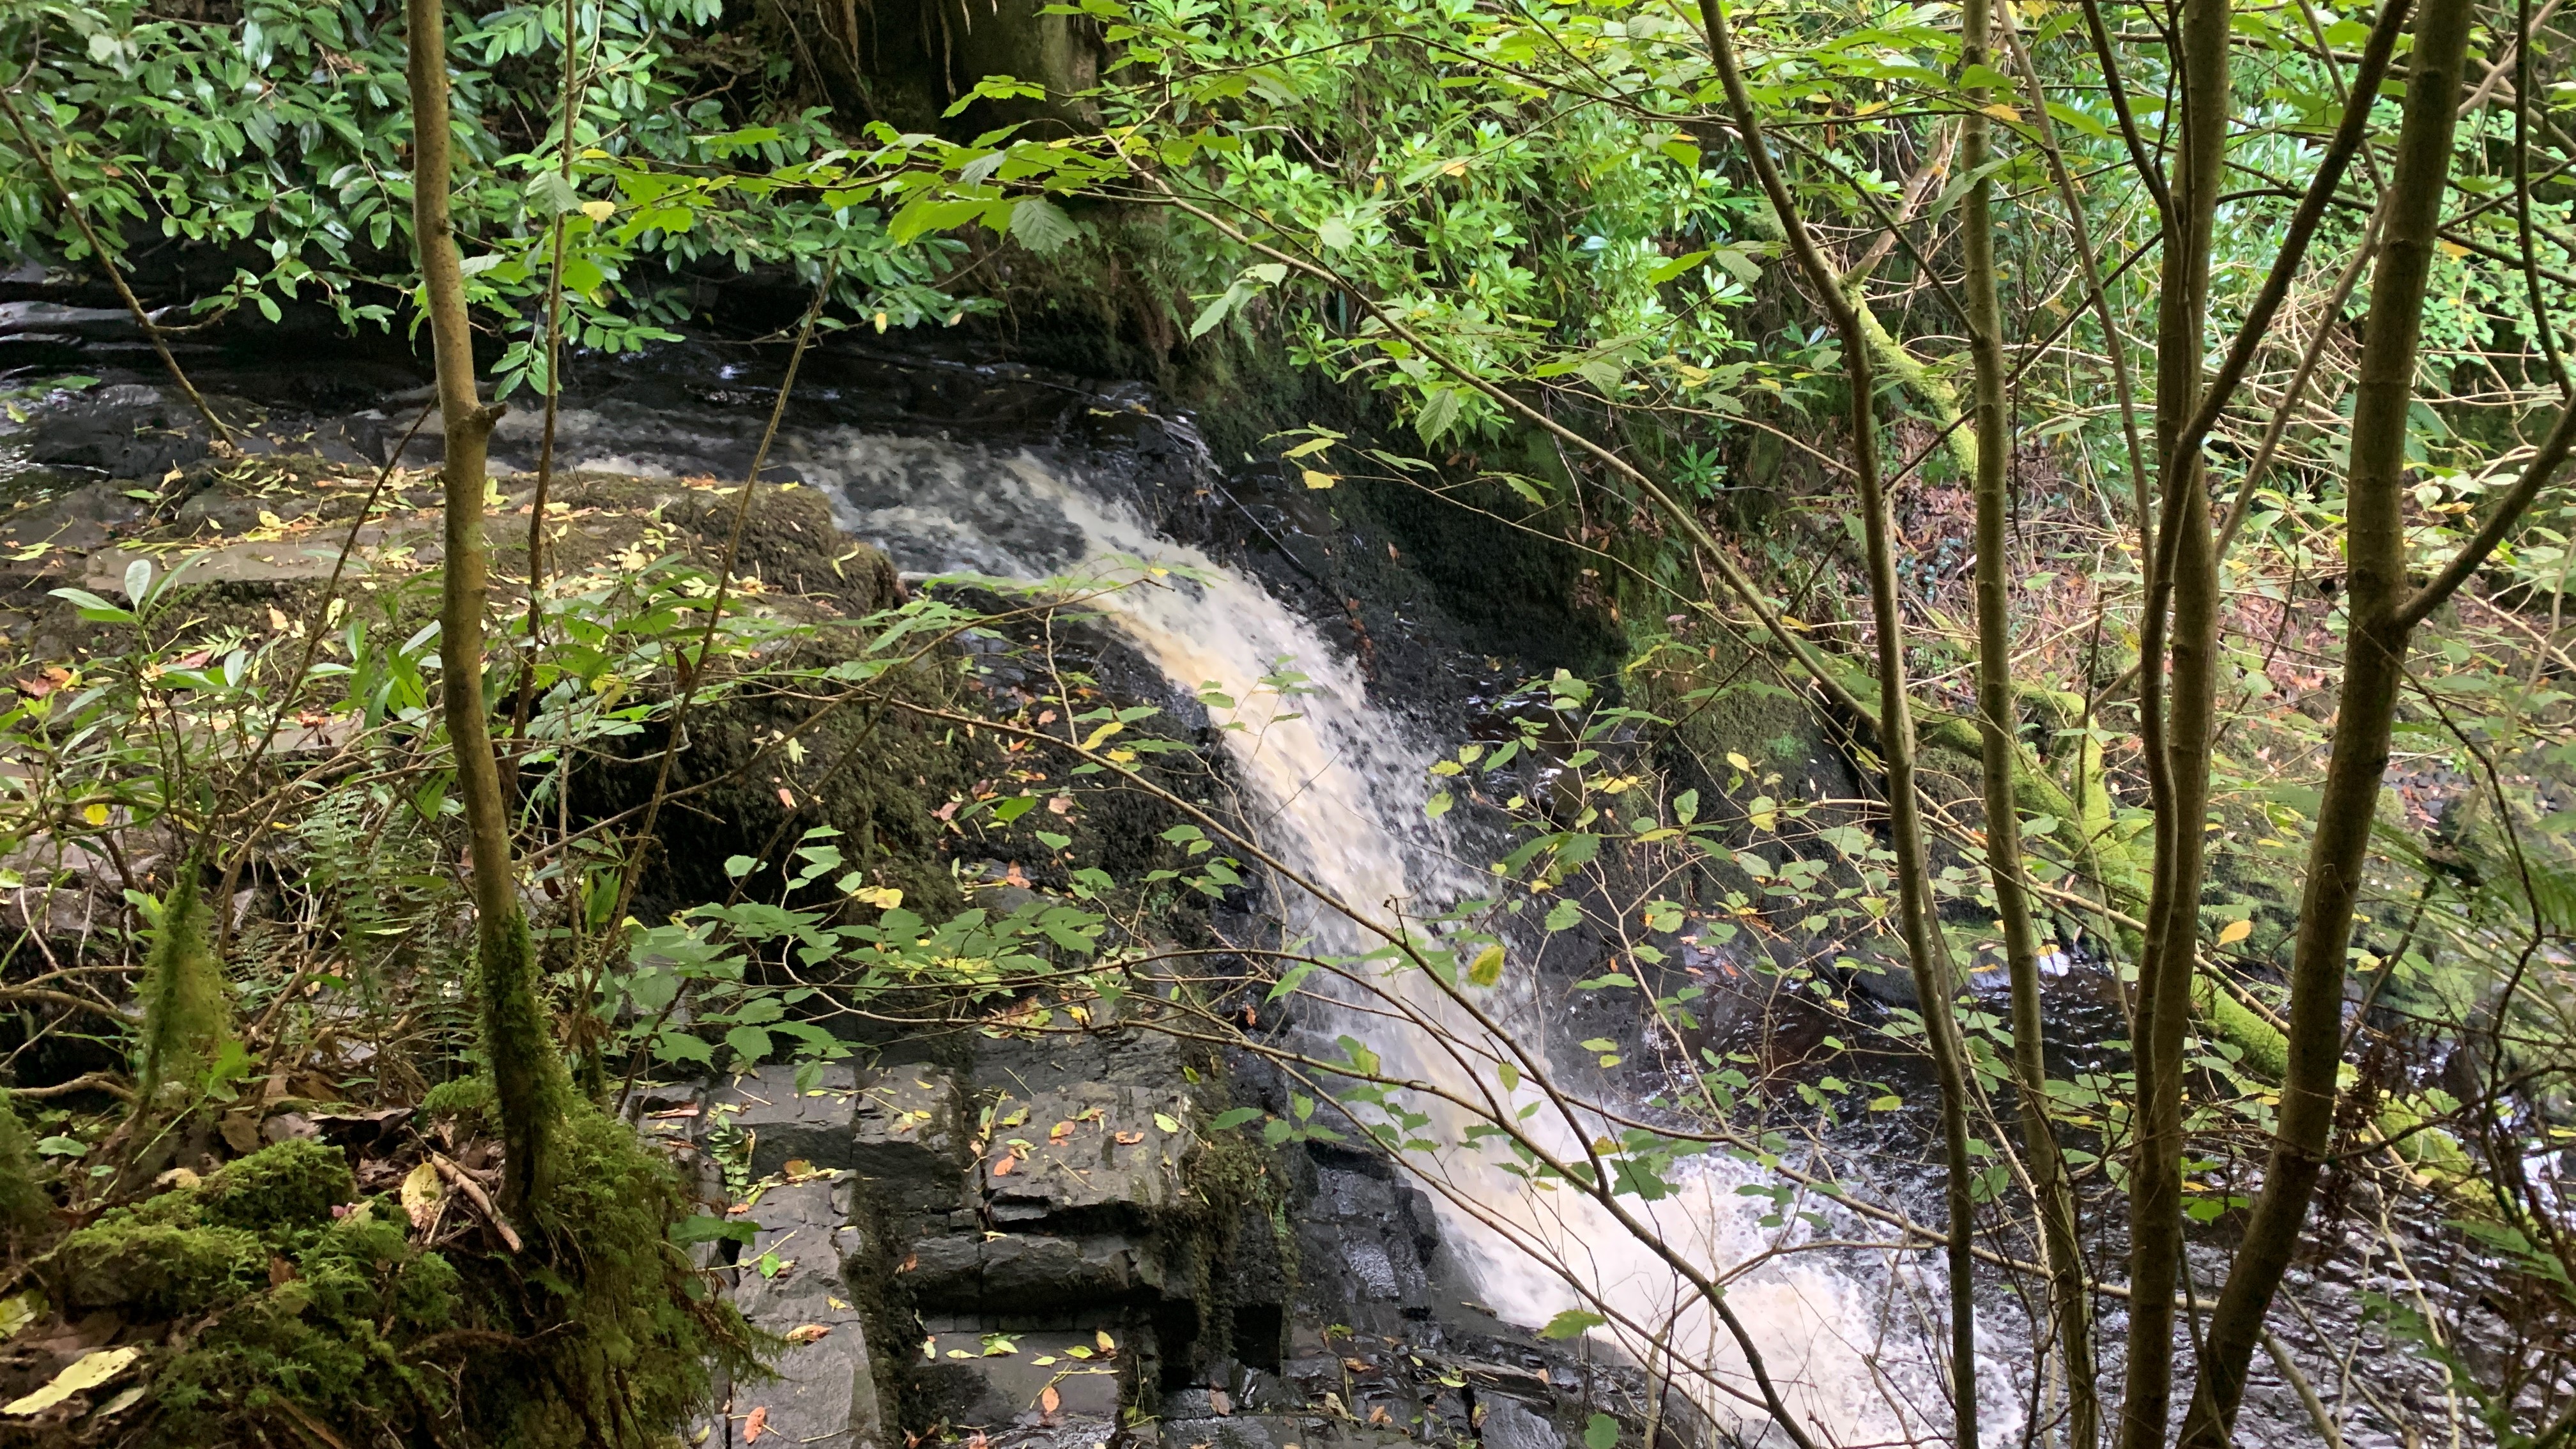 A waterfall on the way to Wemyss Bay